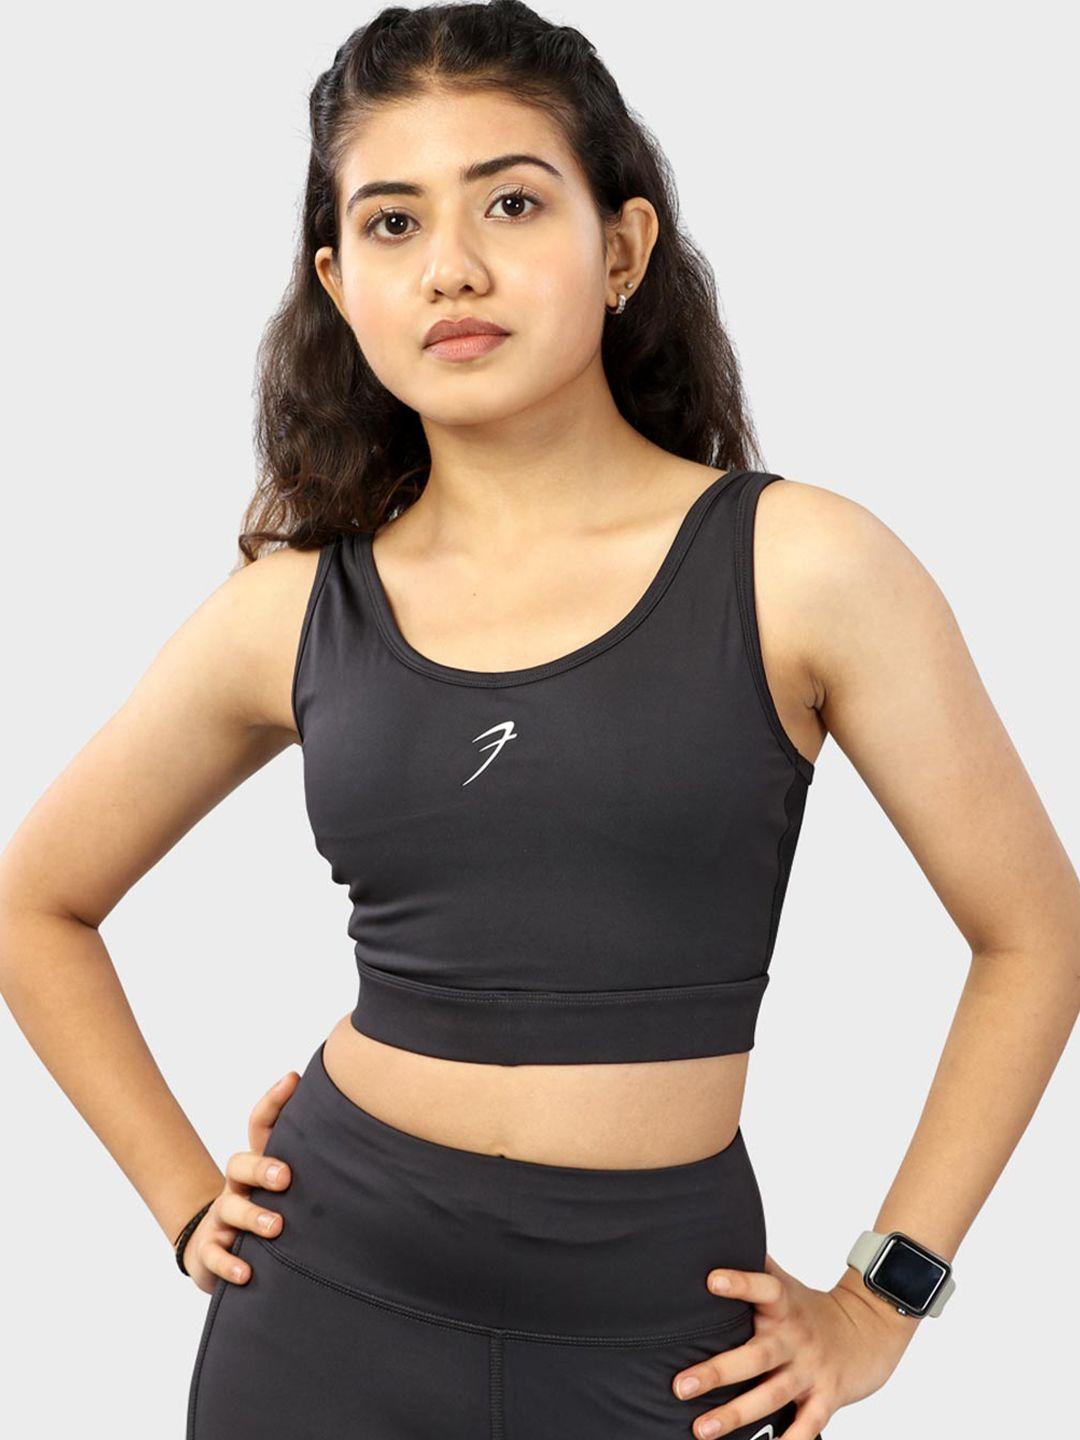 fuaark padded full coverage all day comfort anti-odour sports bra